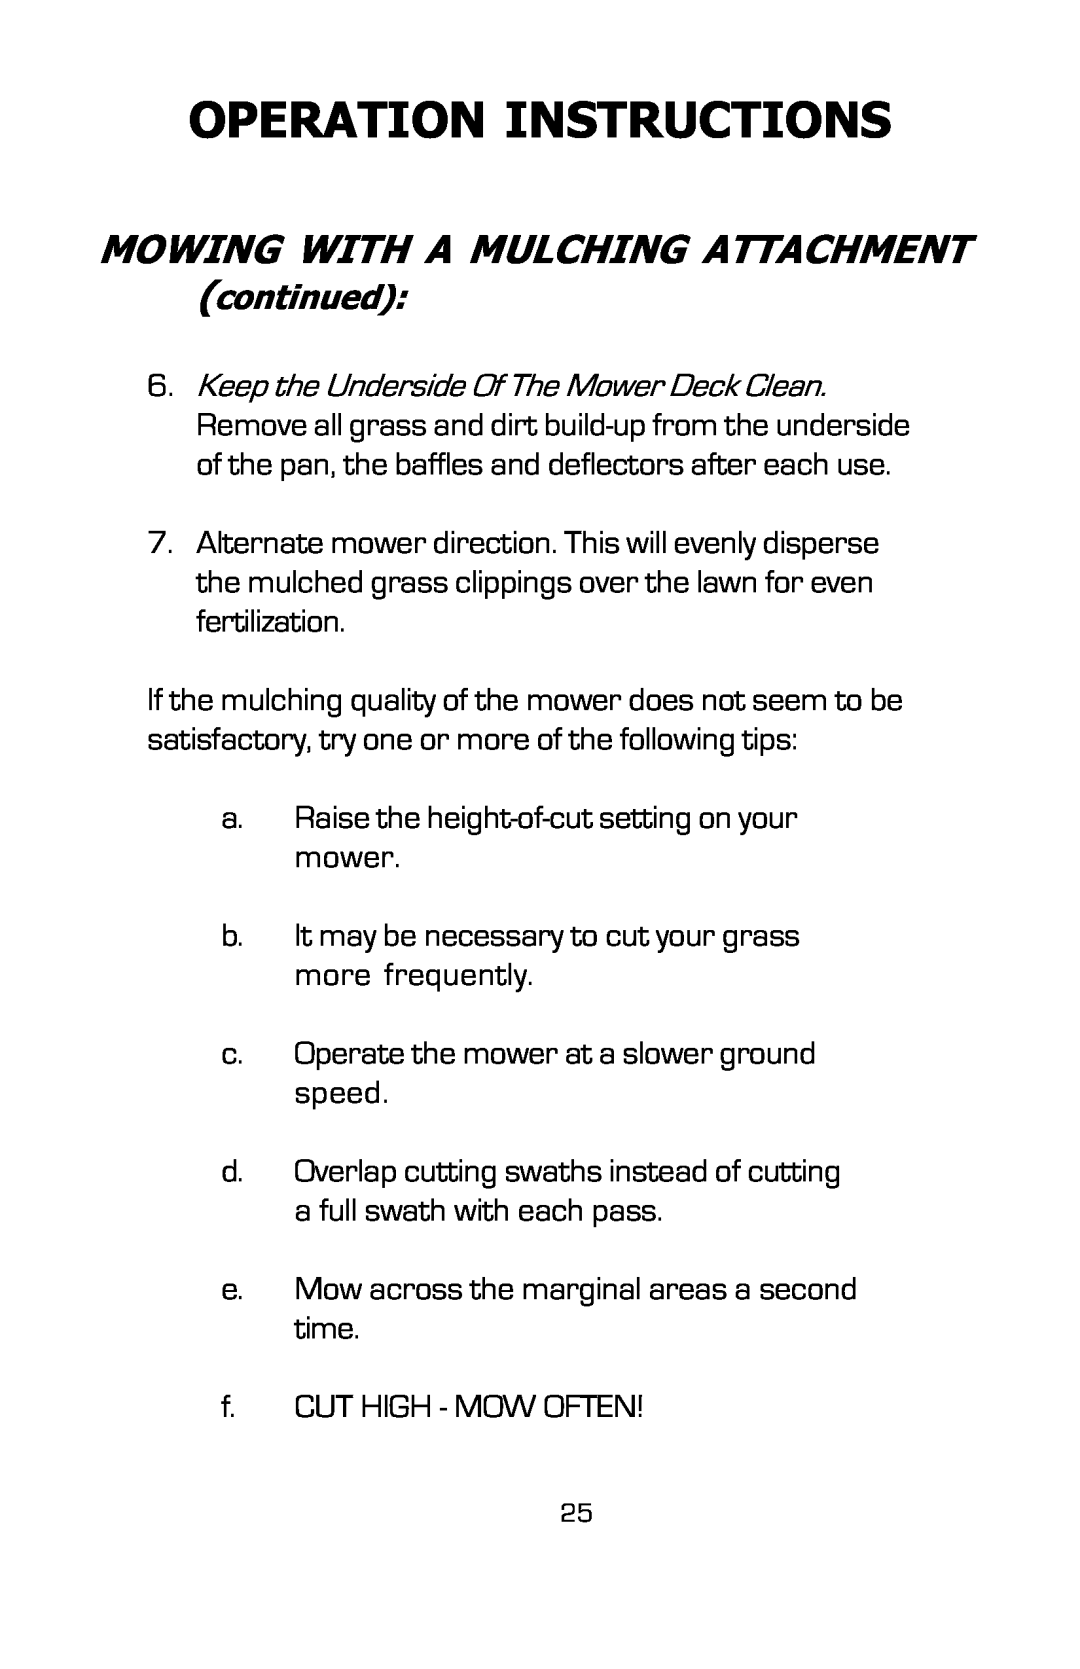 Dixon 16134-0803 manual Operation Instructions, MOWING WITH A MULCHING ATTACHMENT continued 